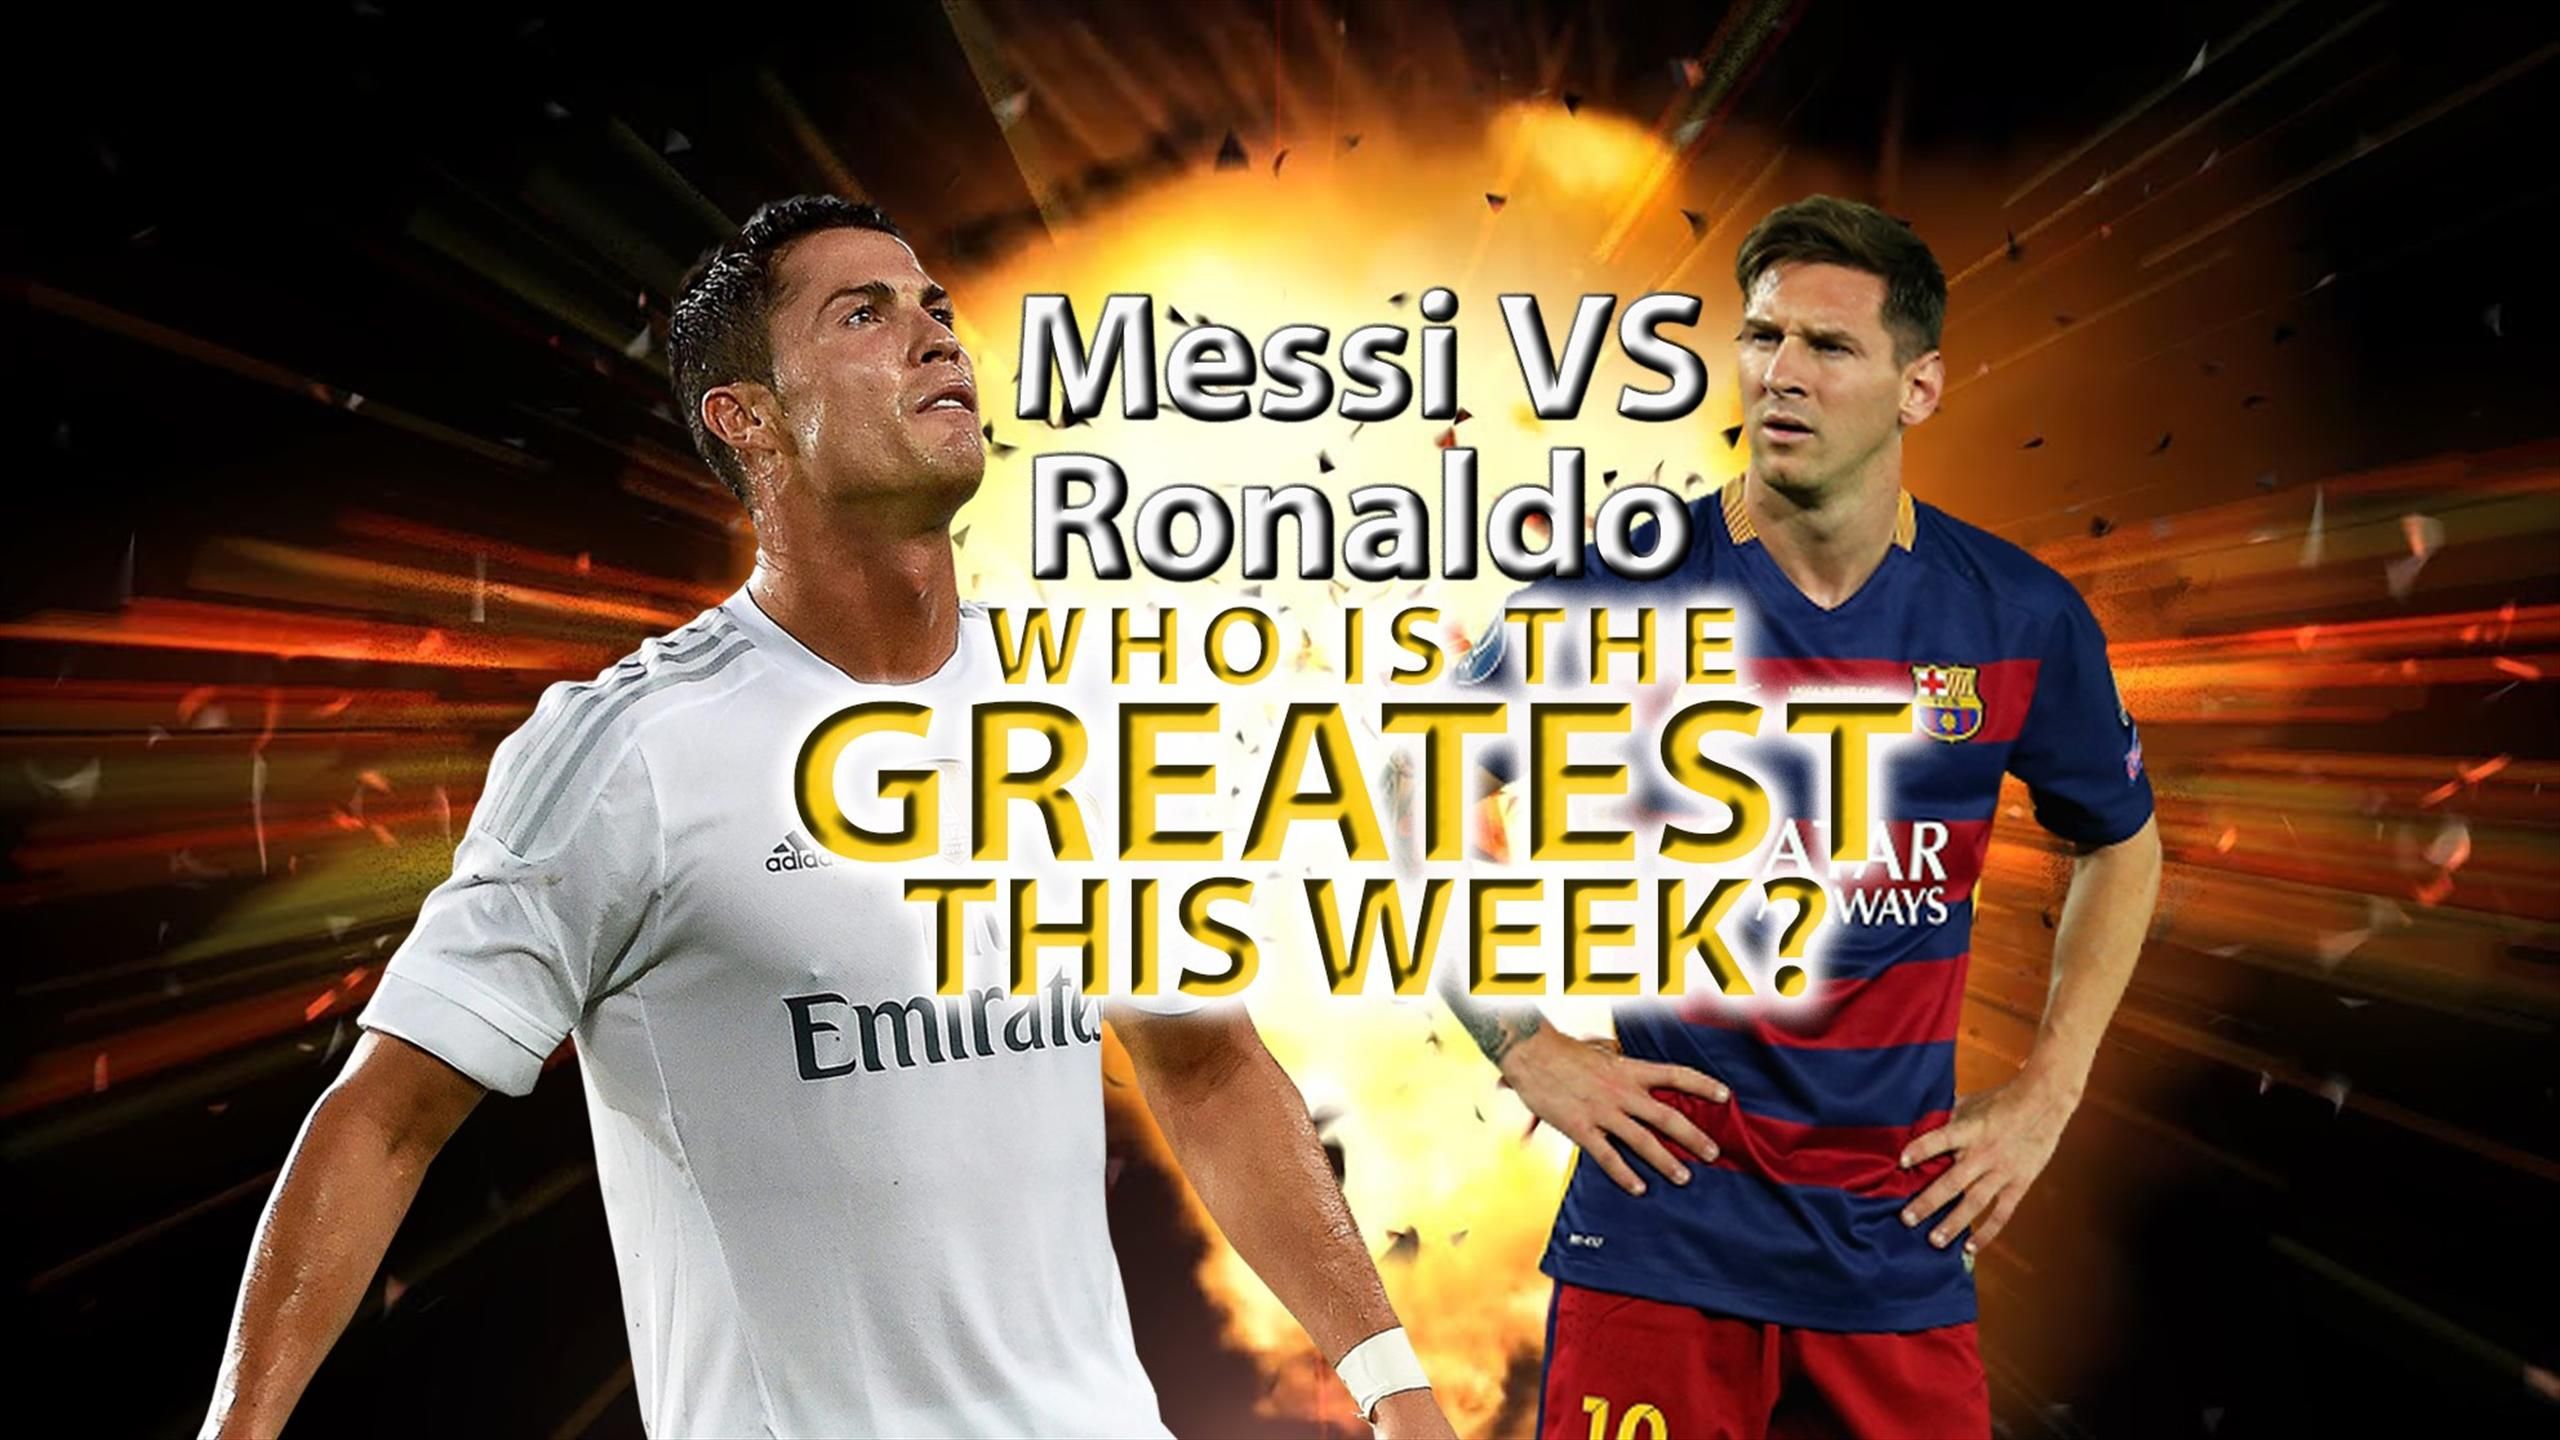 Eurosport - Lionel Messi and Cristiano Ronaldo's now infamous